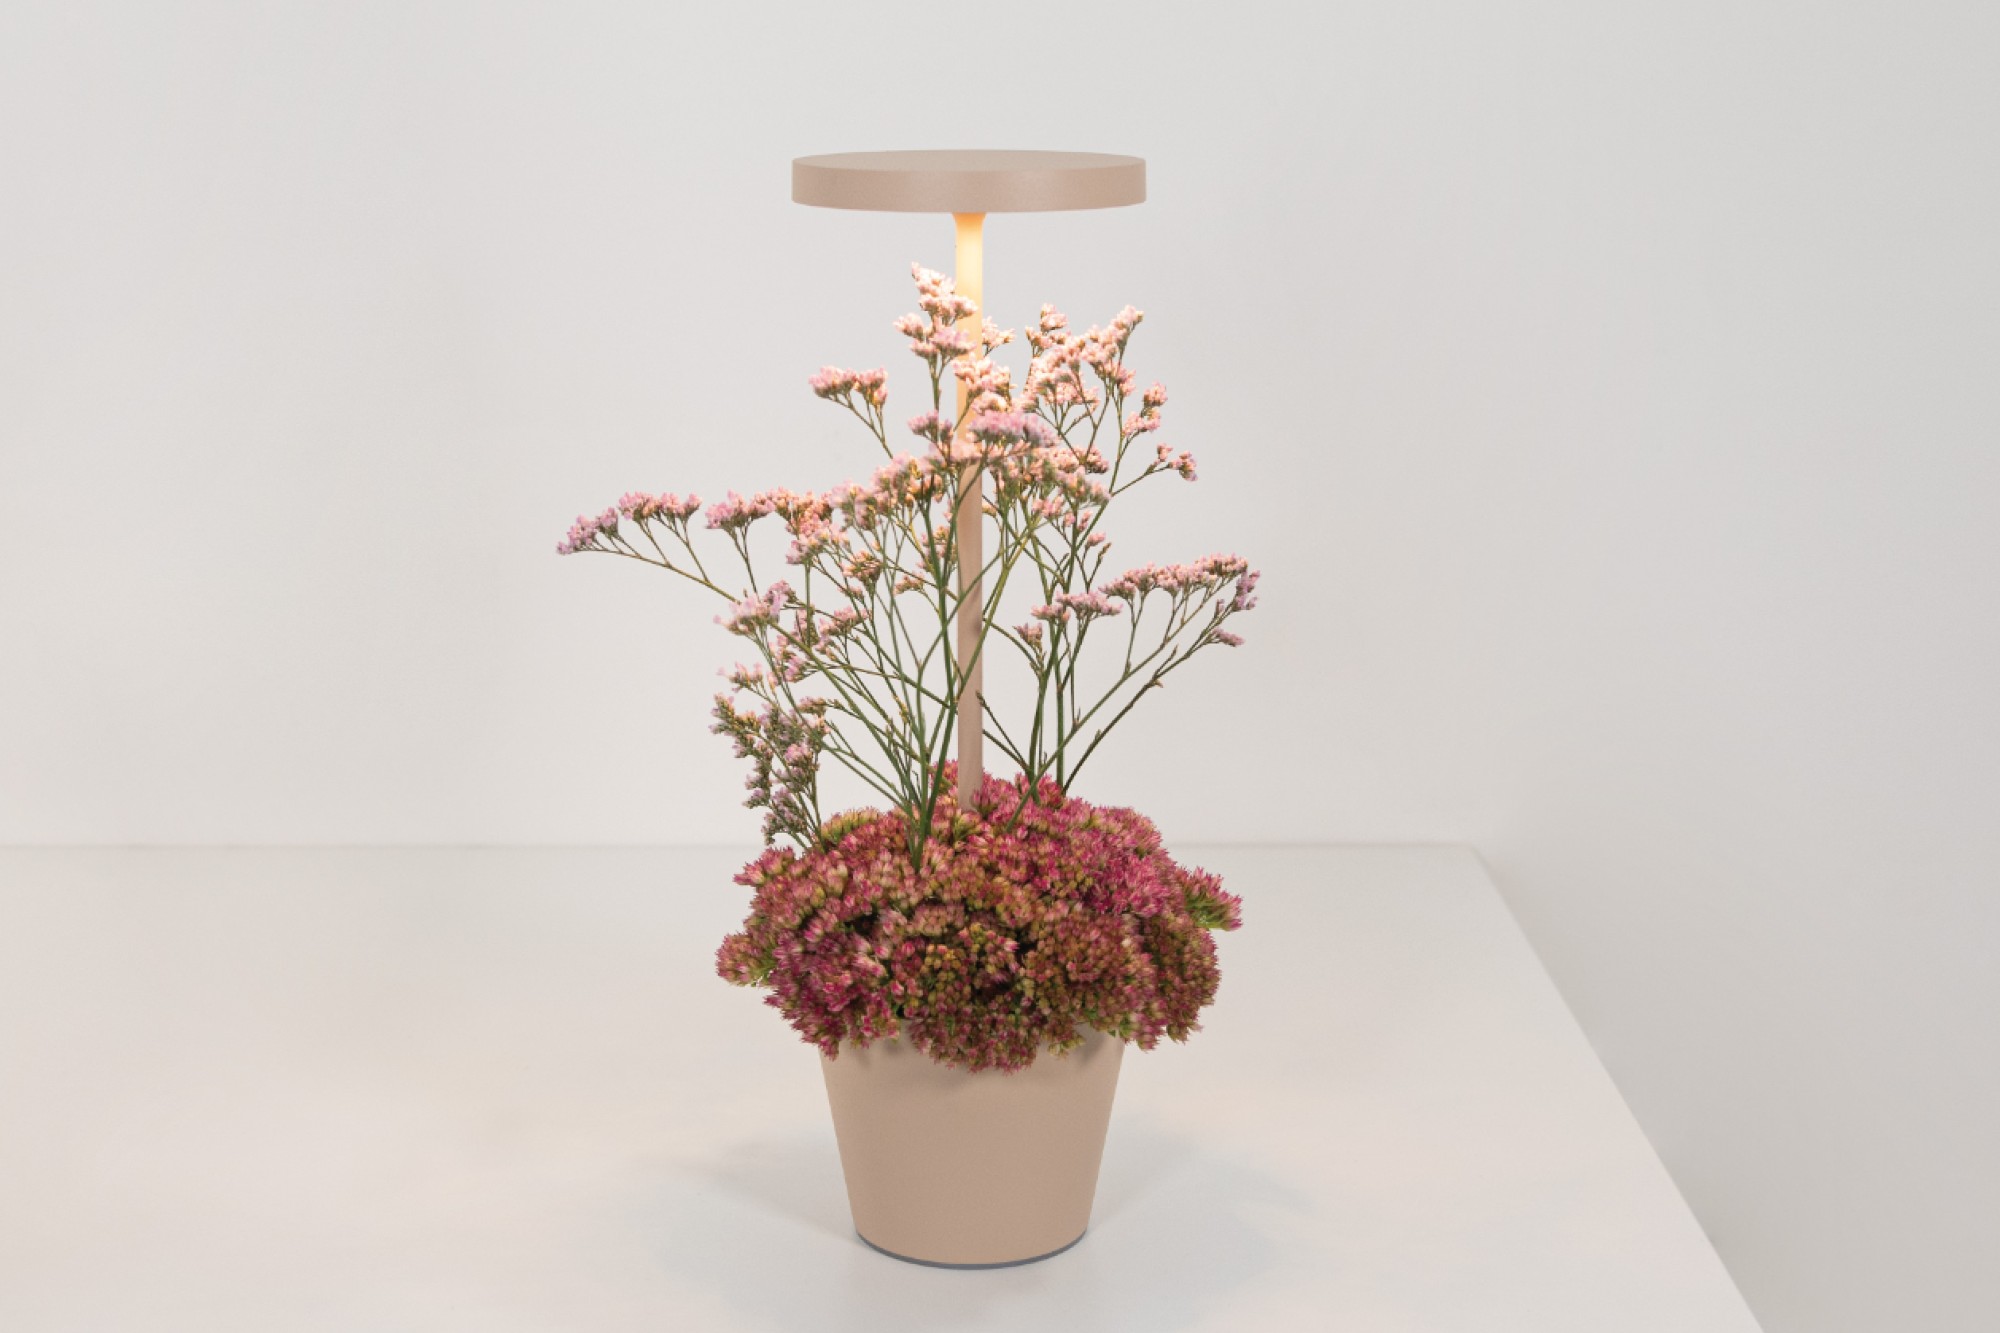 IDS unveils innovative light collection